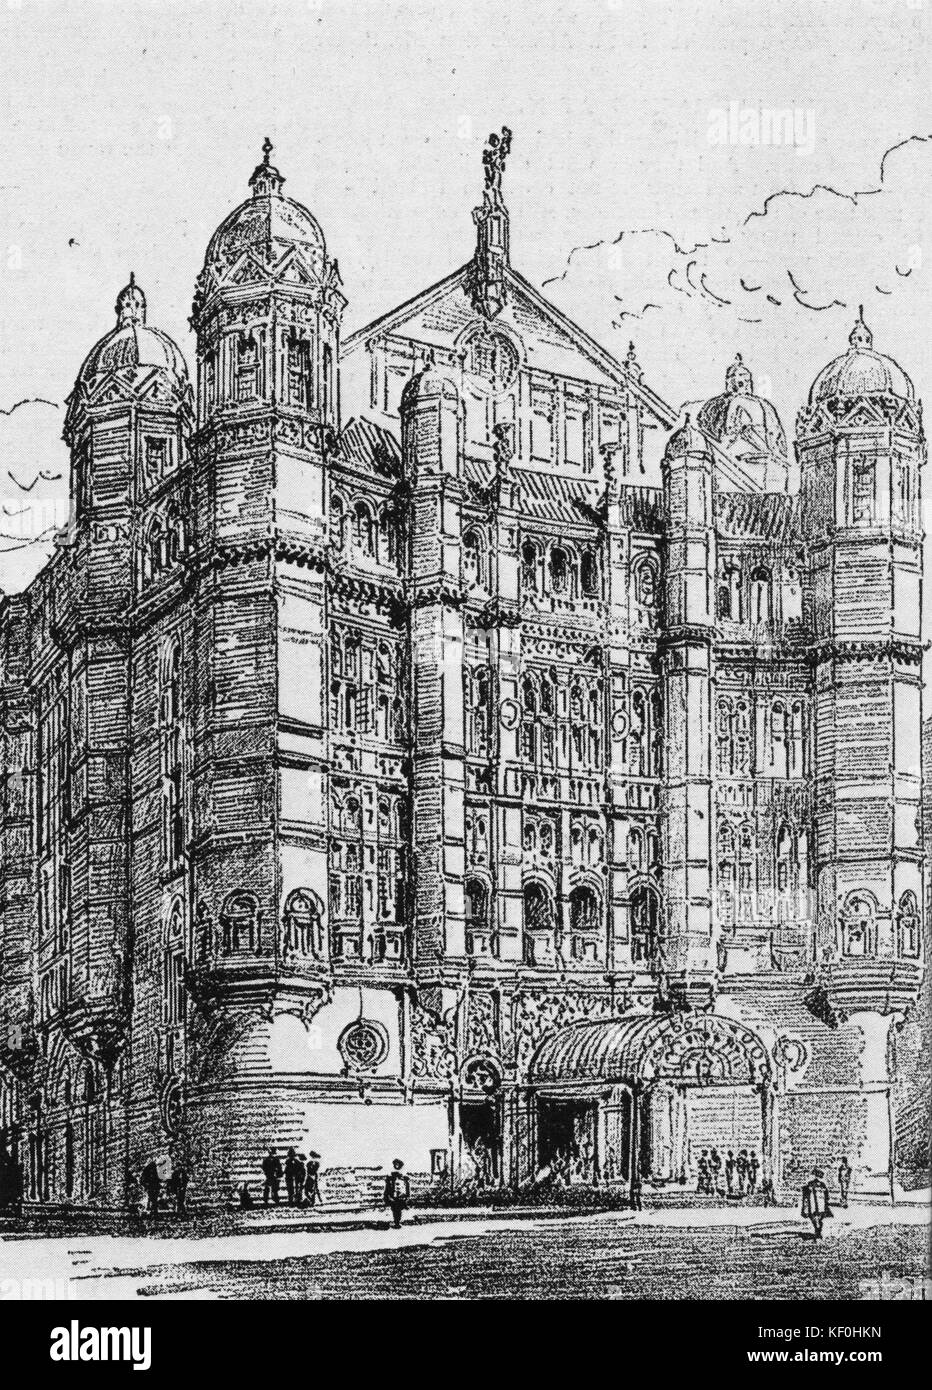 Royal English Opera House, (now the Palace Theatre), 1891. Artist's impression. Stock Photo